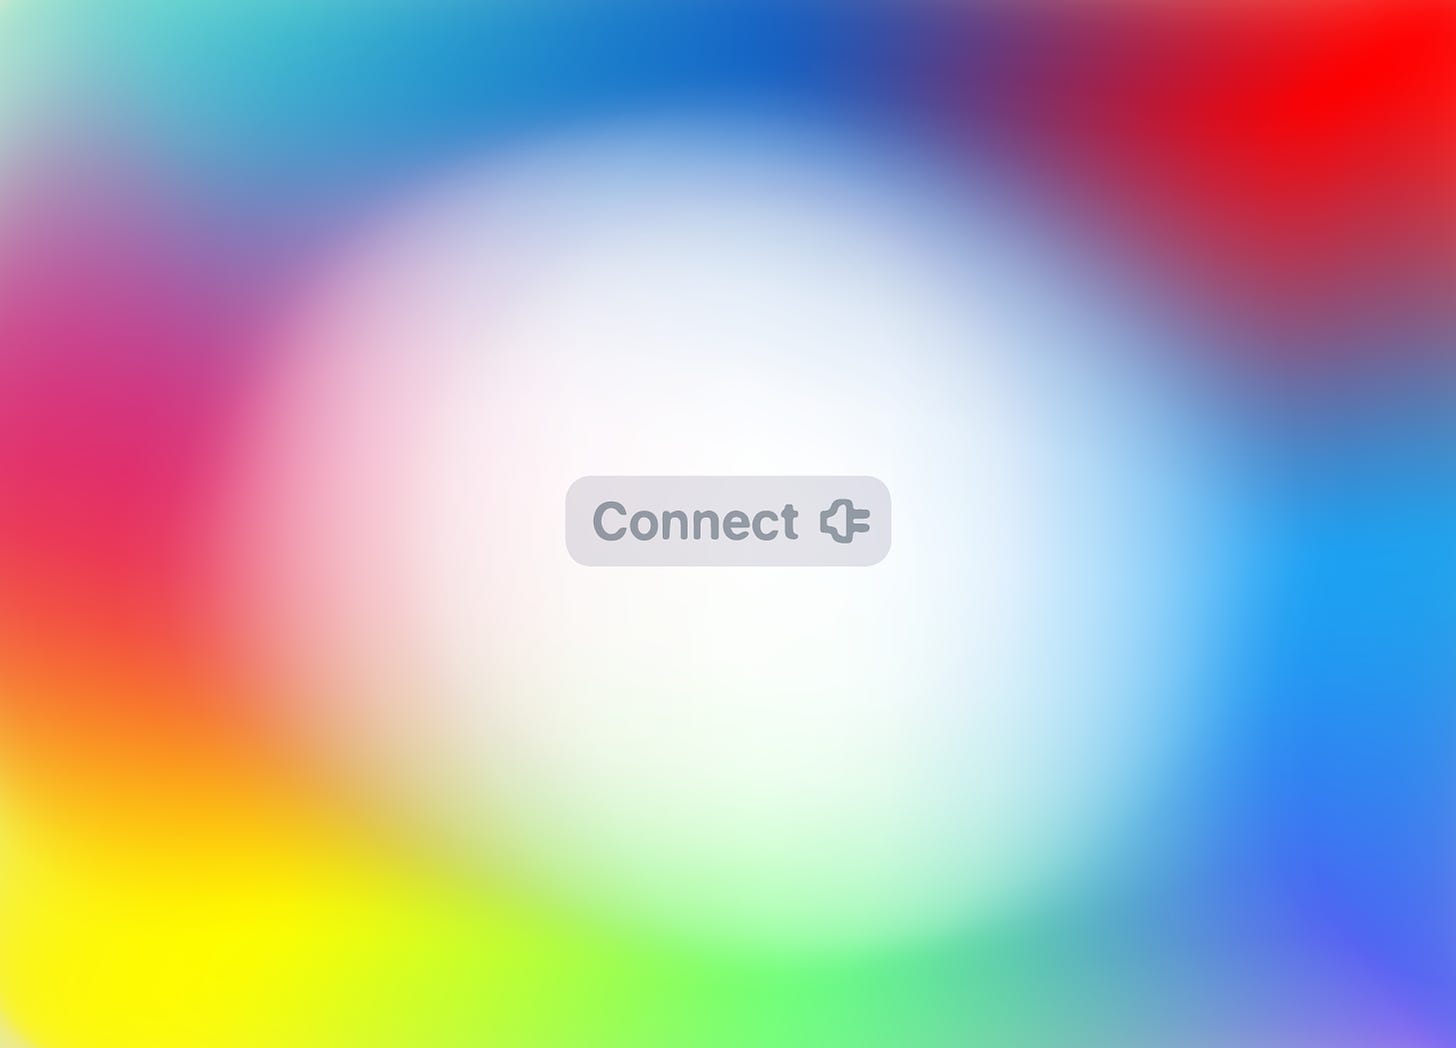 A small button in the center that says “Connect” with a little plug icon surrounded by bold colors